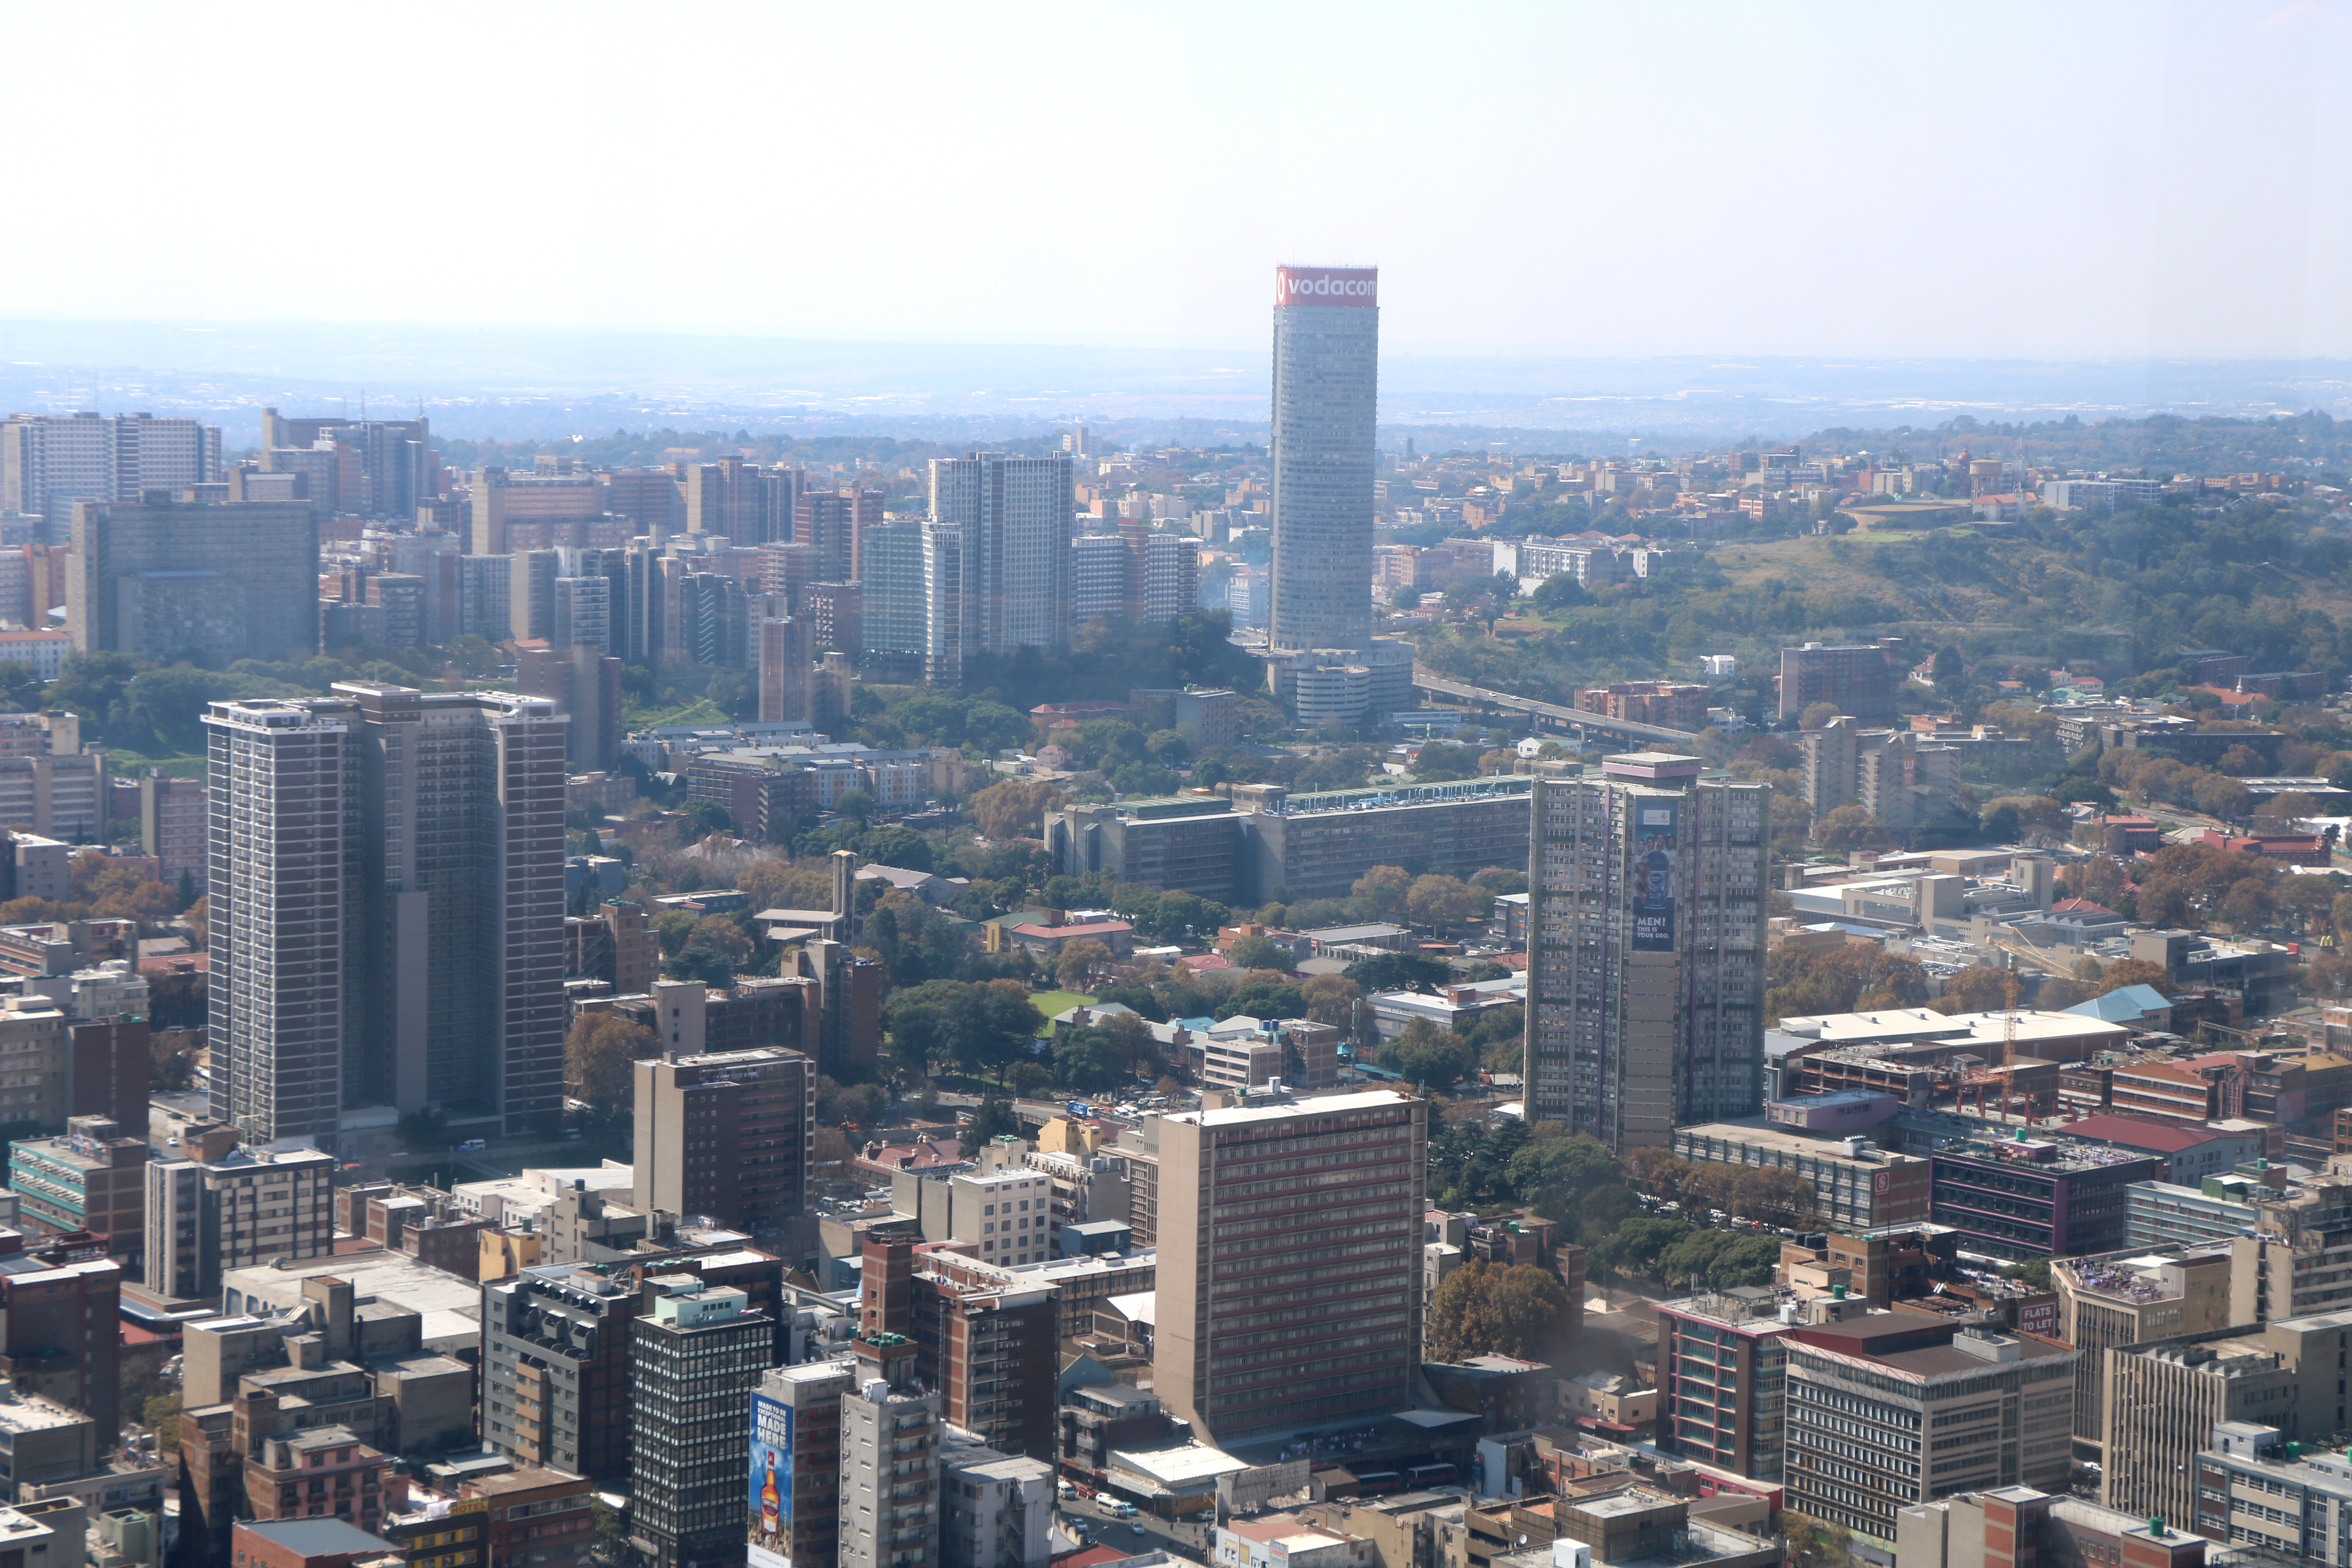 The view of Johannesburg from Carlton Center